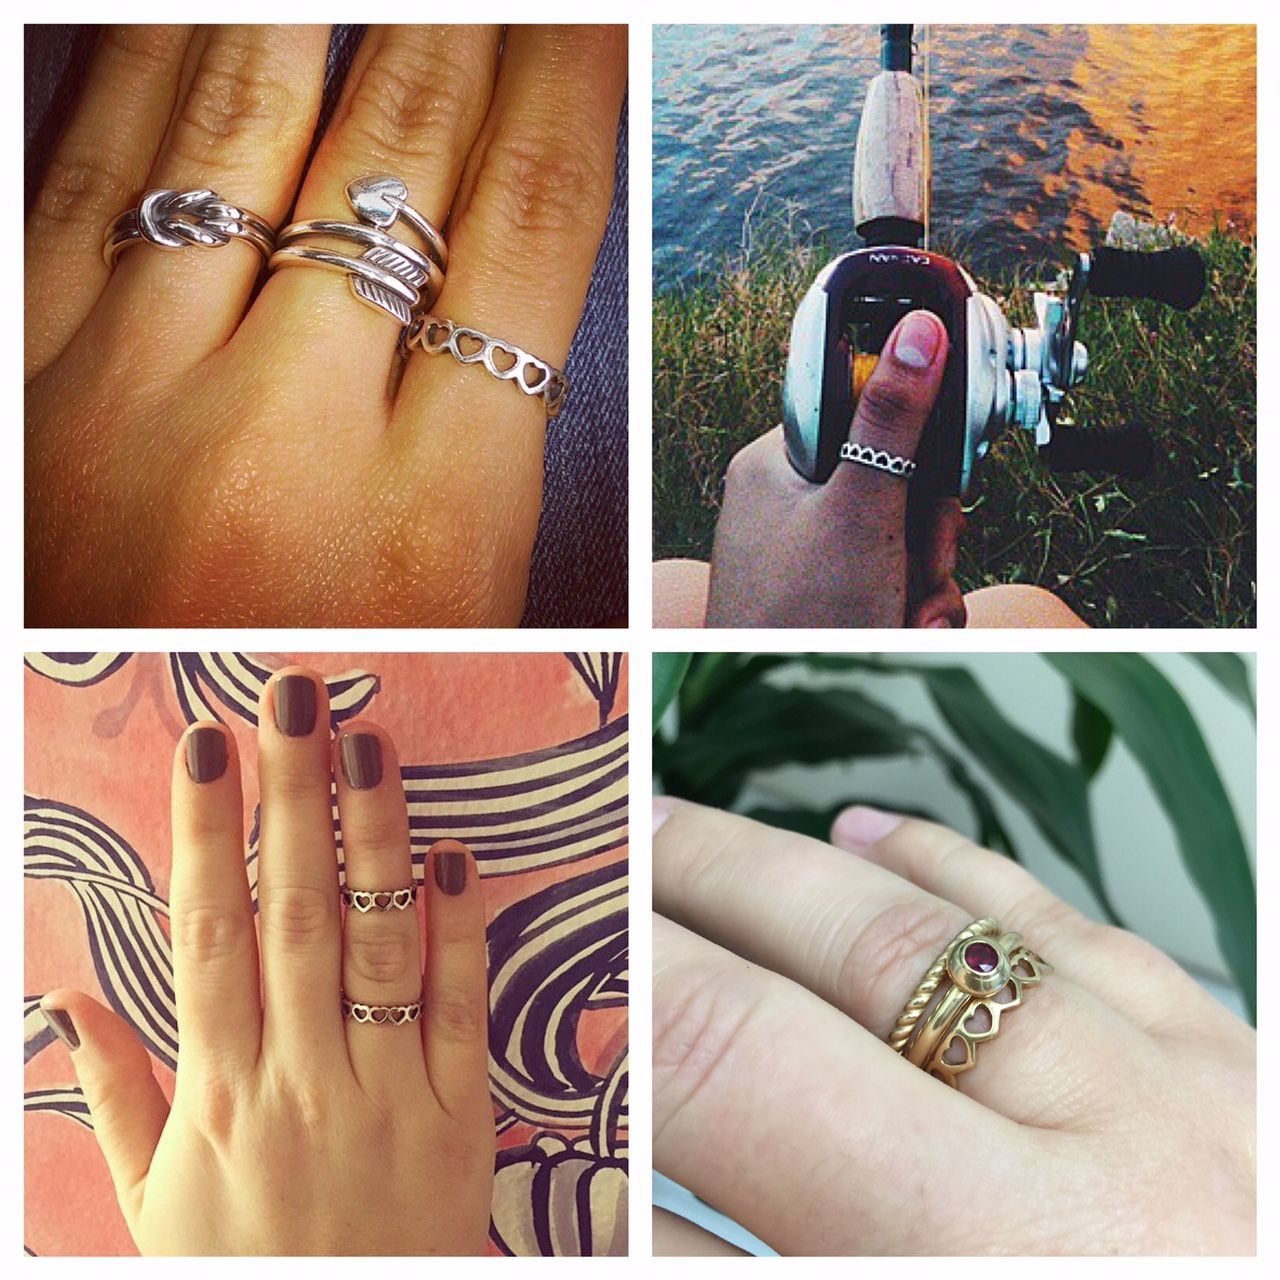 Style Tip: The Tiny Hearts Band Can Be Worn Many Ways – As A Thumb Regarding Current Band Of Hearts Rings (View 9 of 25)